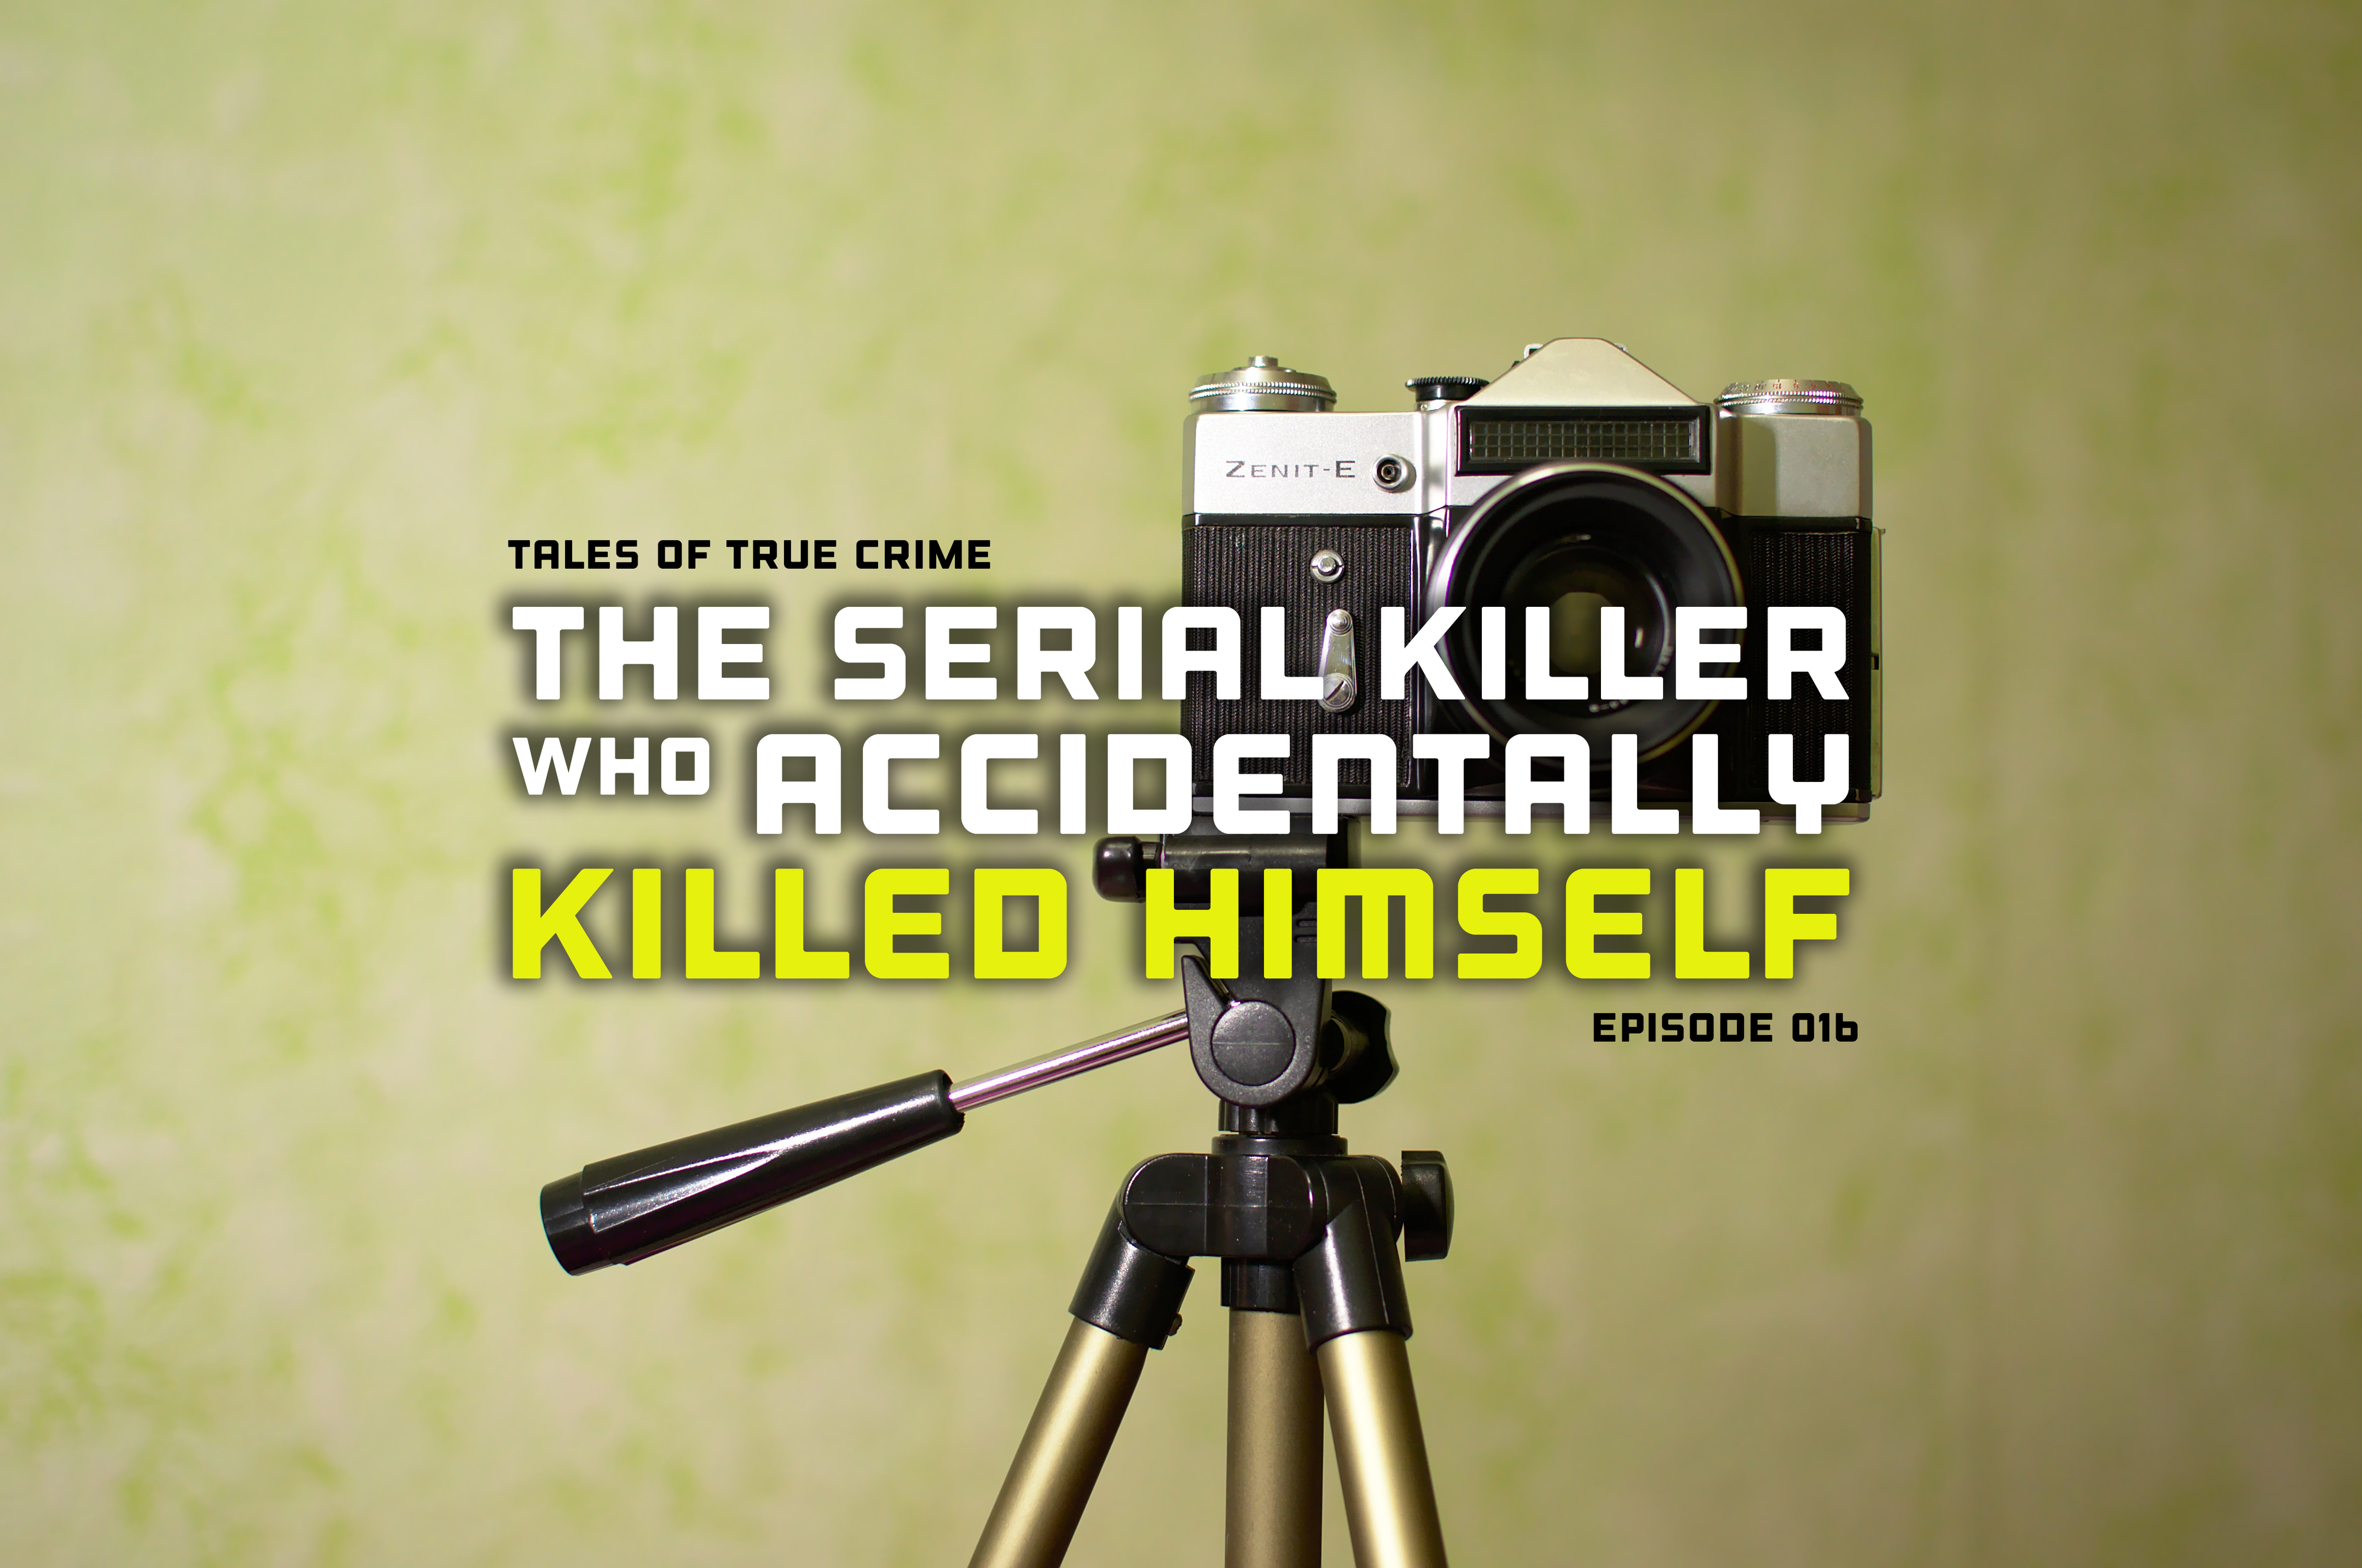 The Serial Killer Who Accidentally Killed Himself